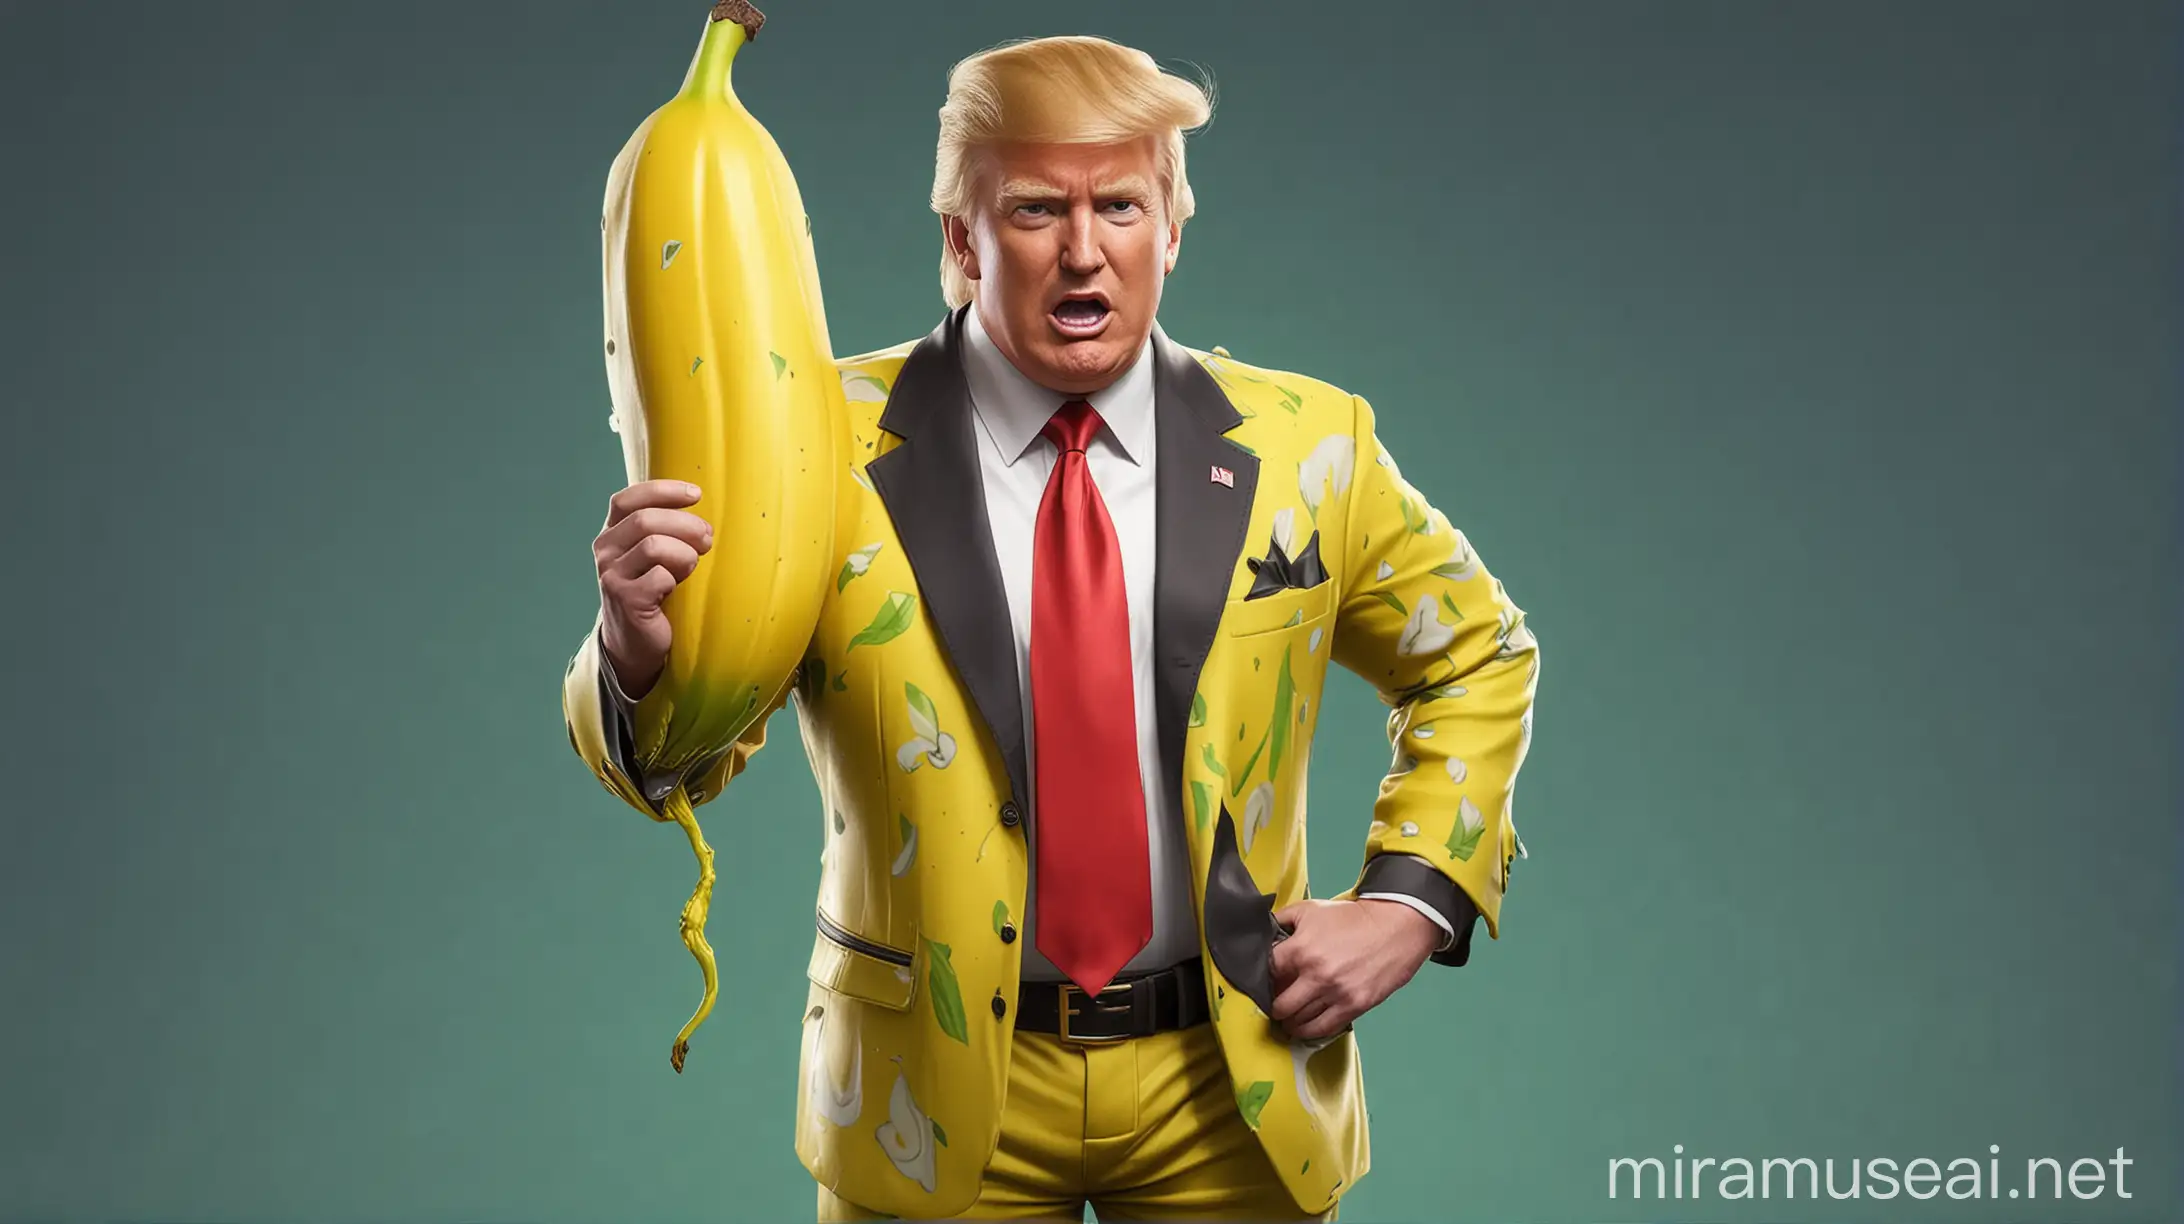 Fortnite Style Donald Trump in Vibrant Banana Suit with Green Background